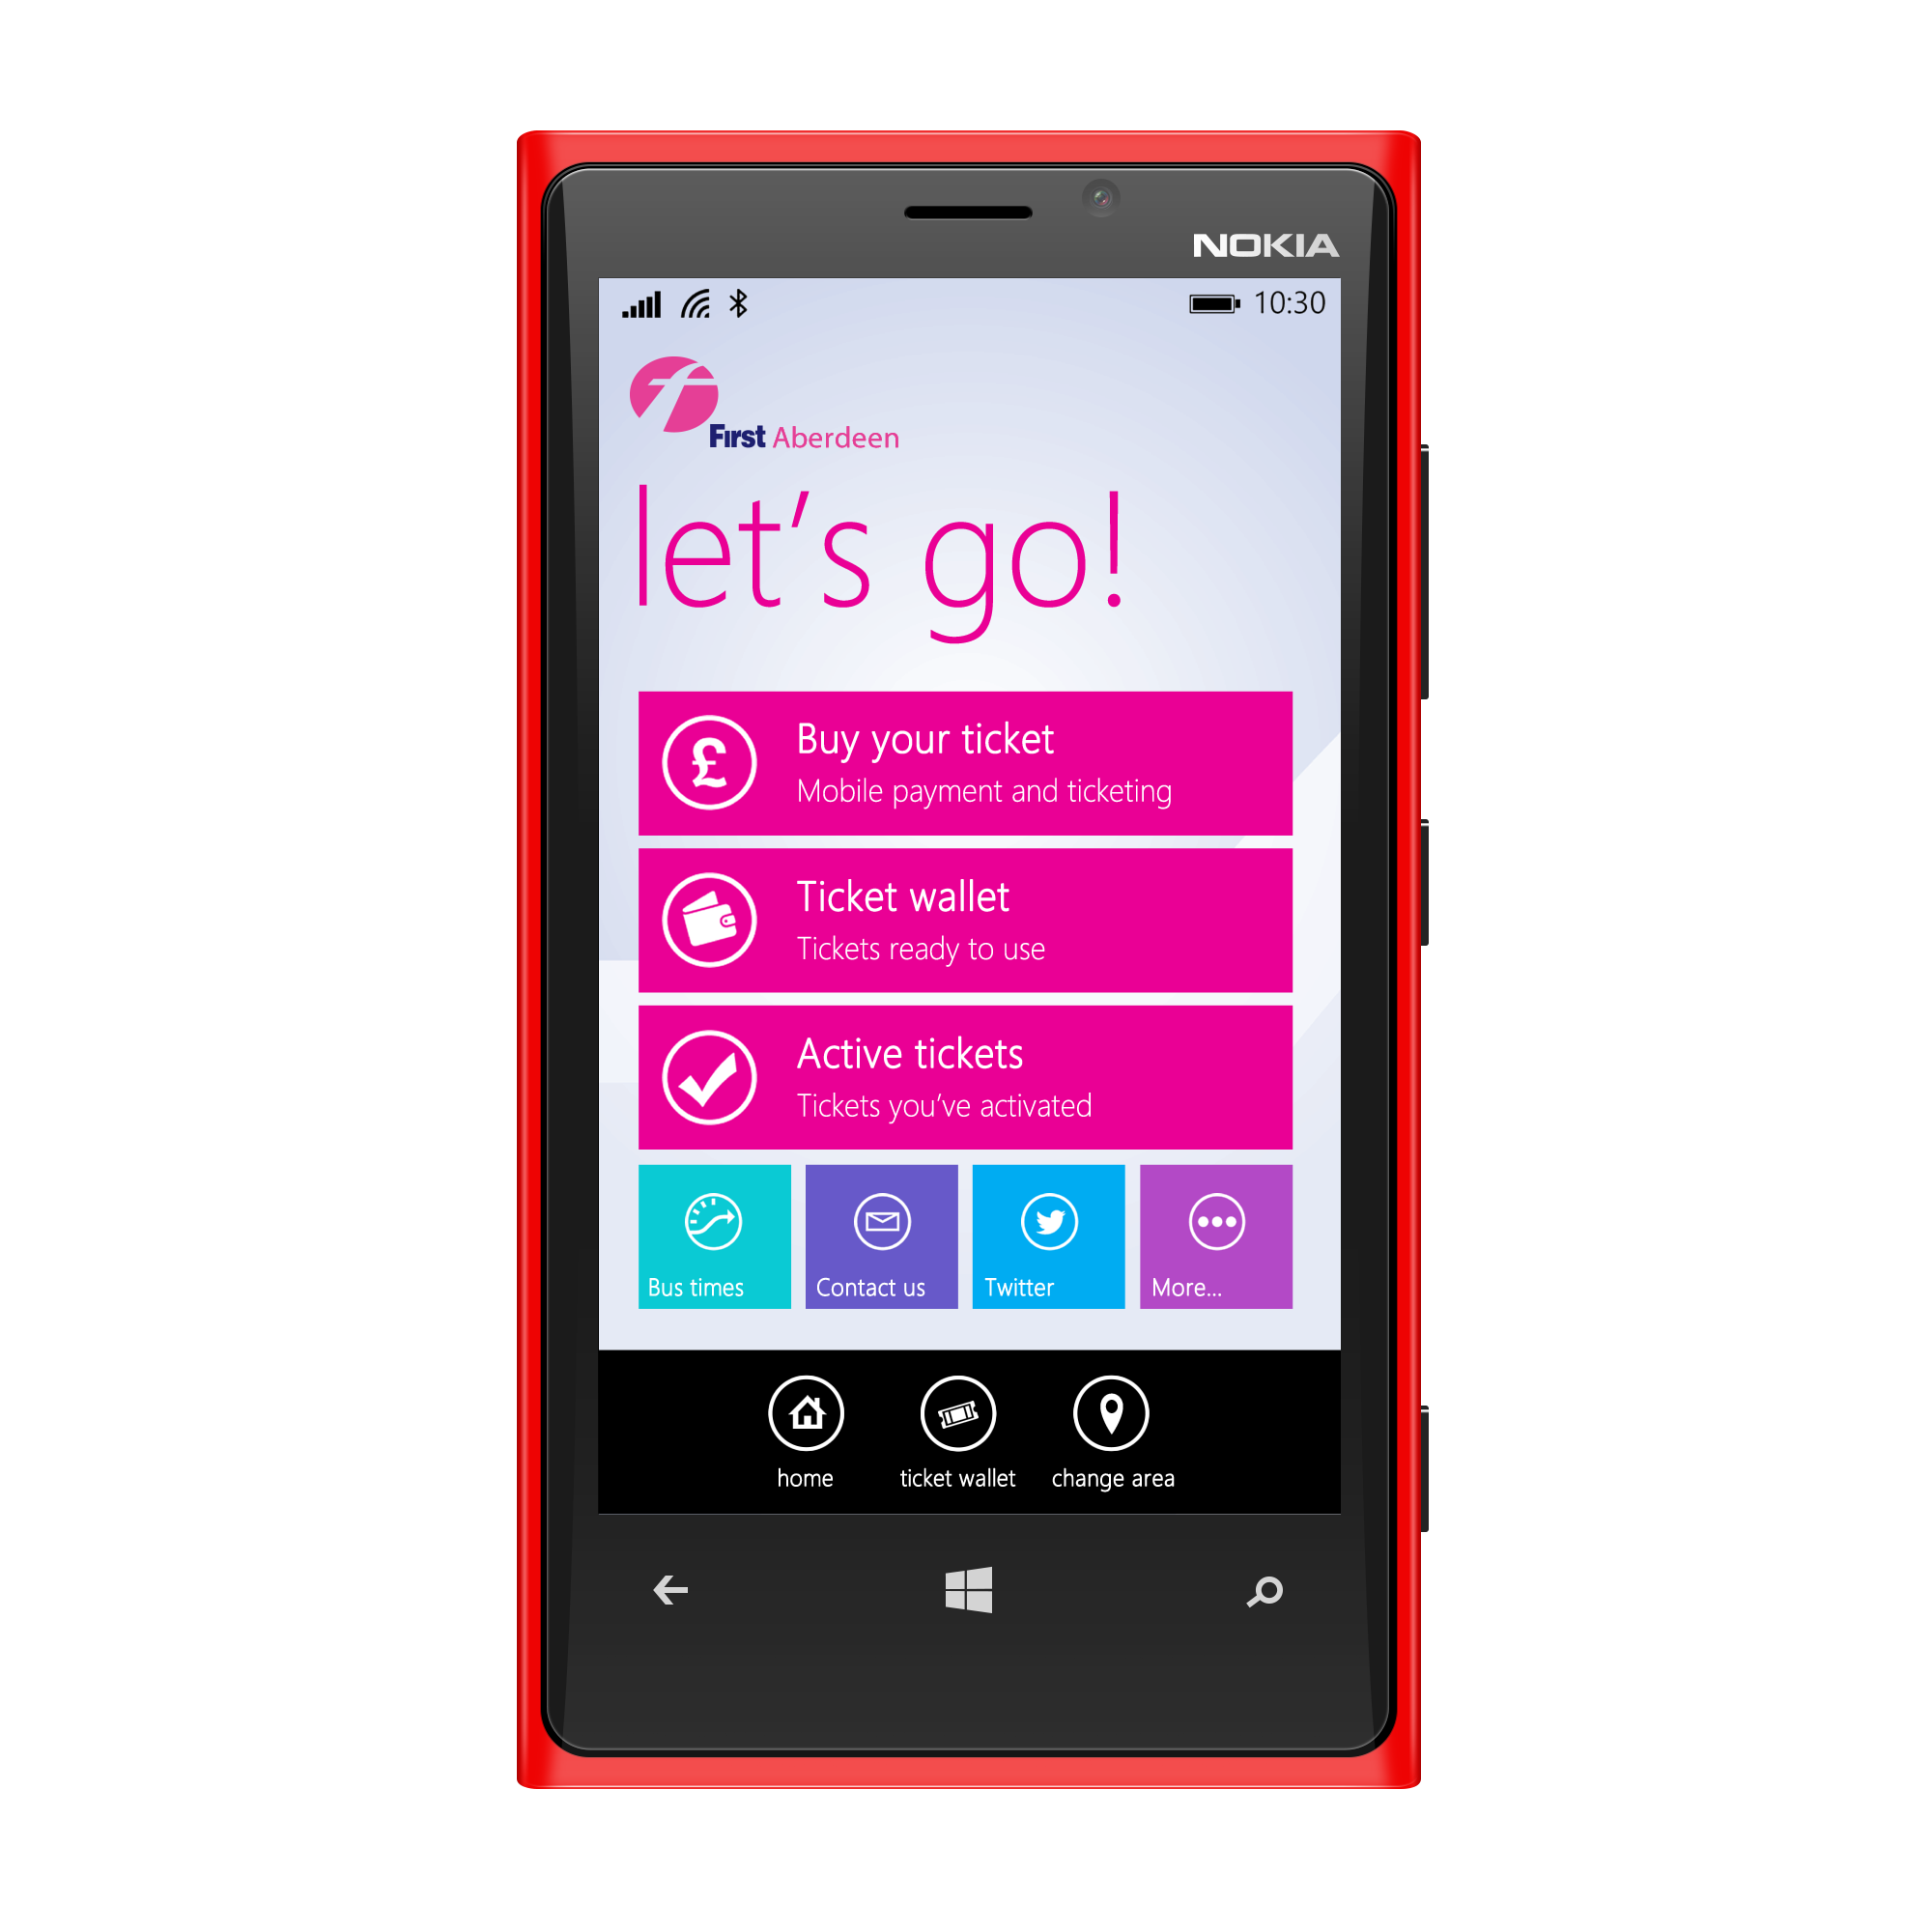 Microsoft Teams Up With Corethree To Build Mobile Ticket Transport Apps In The Uk Windows Central